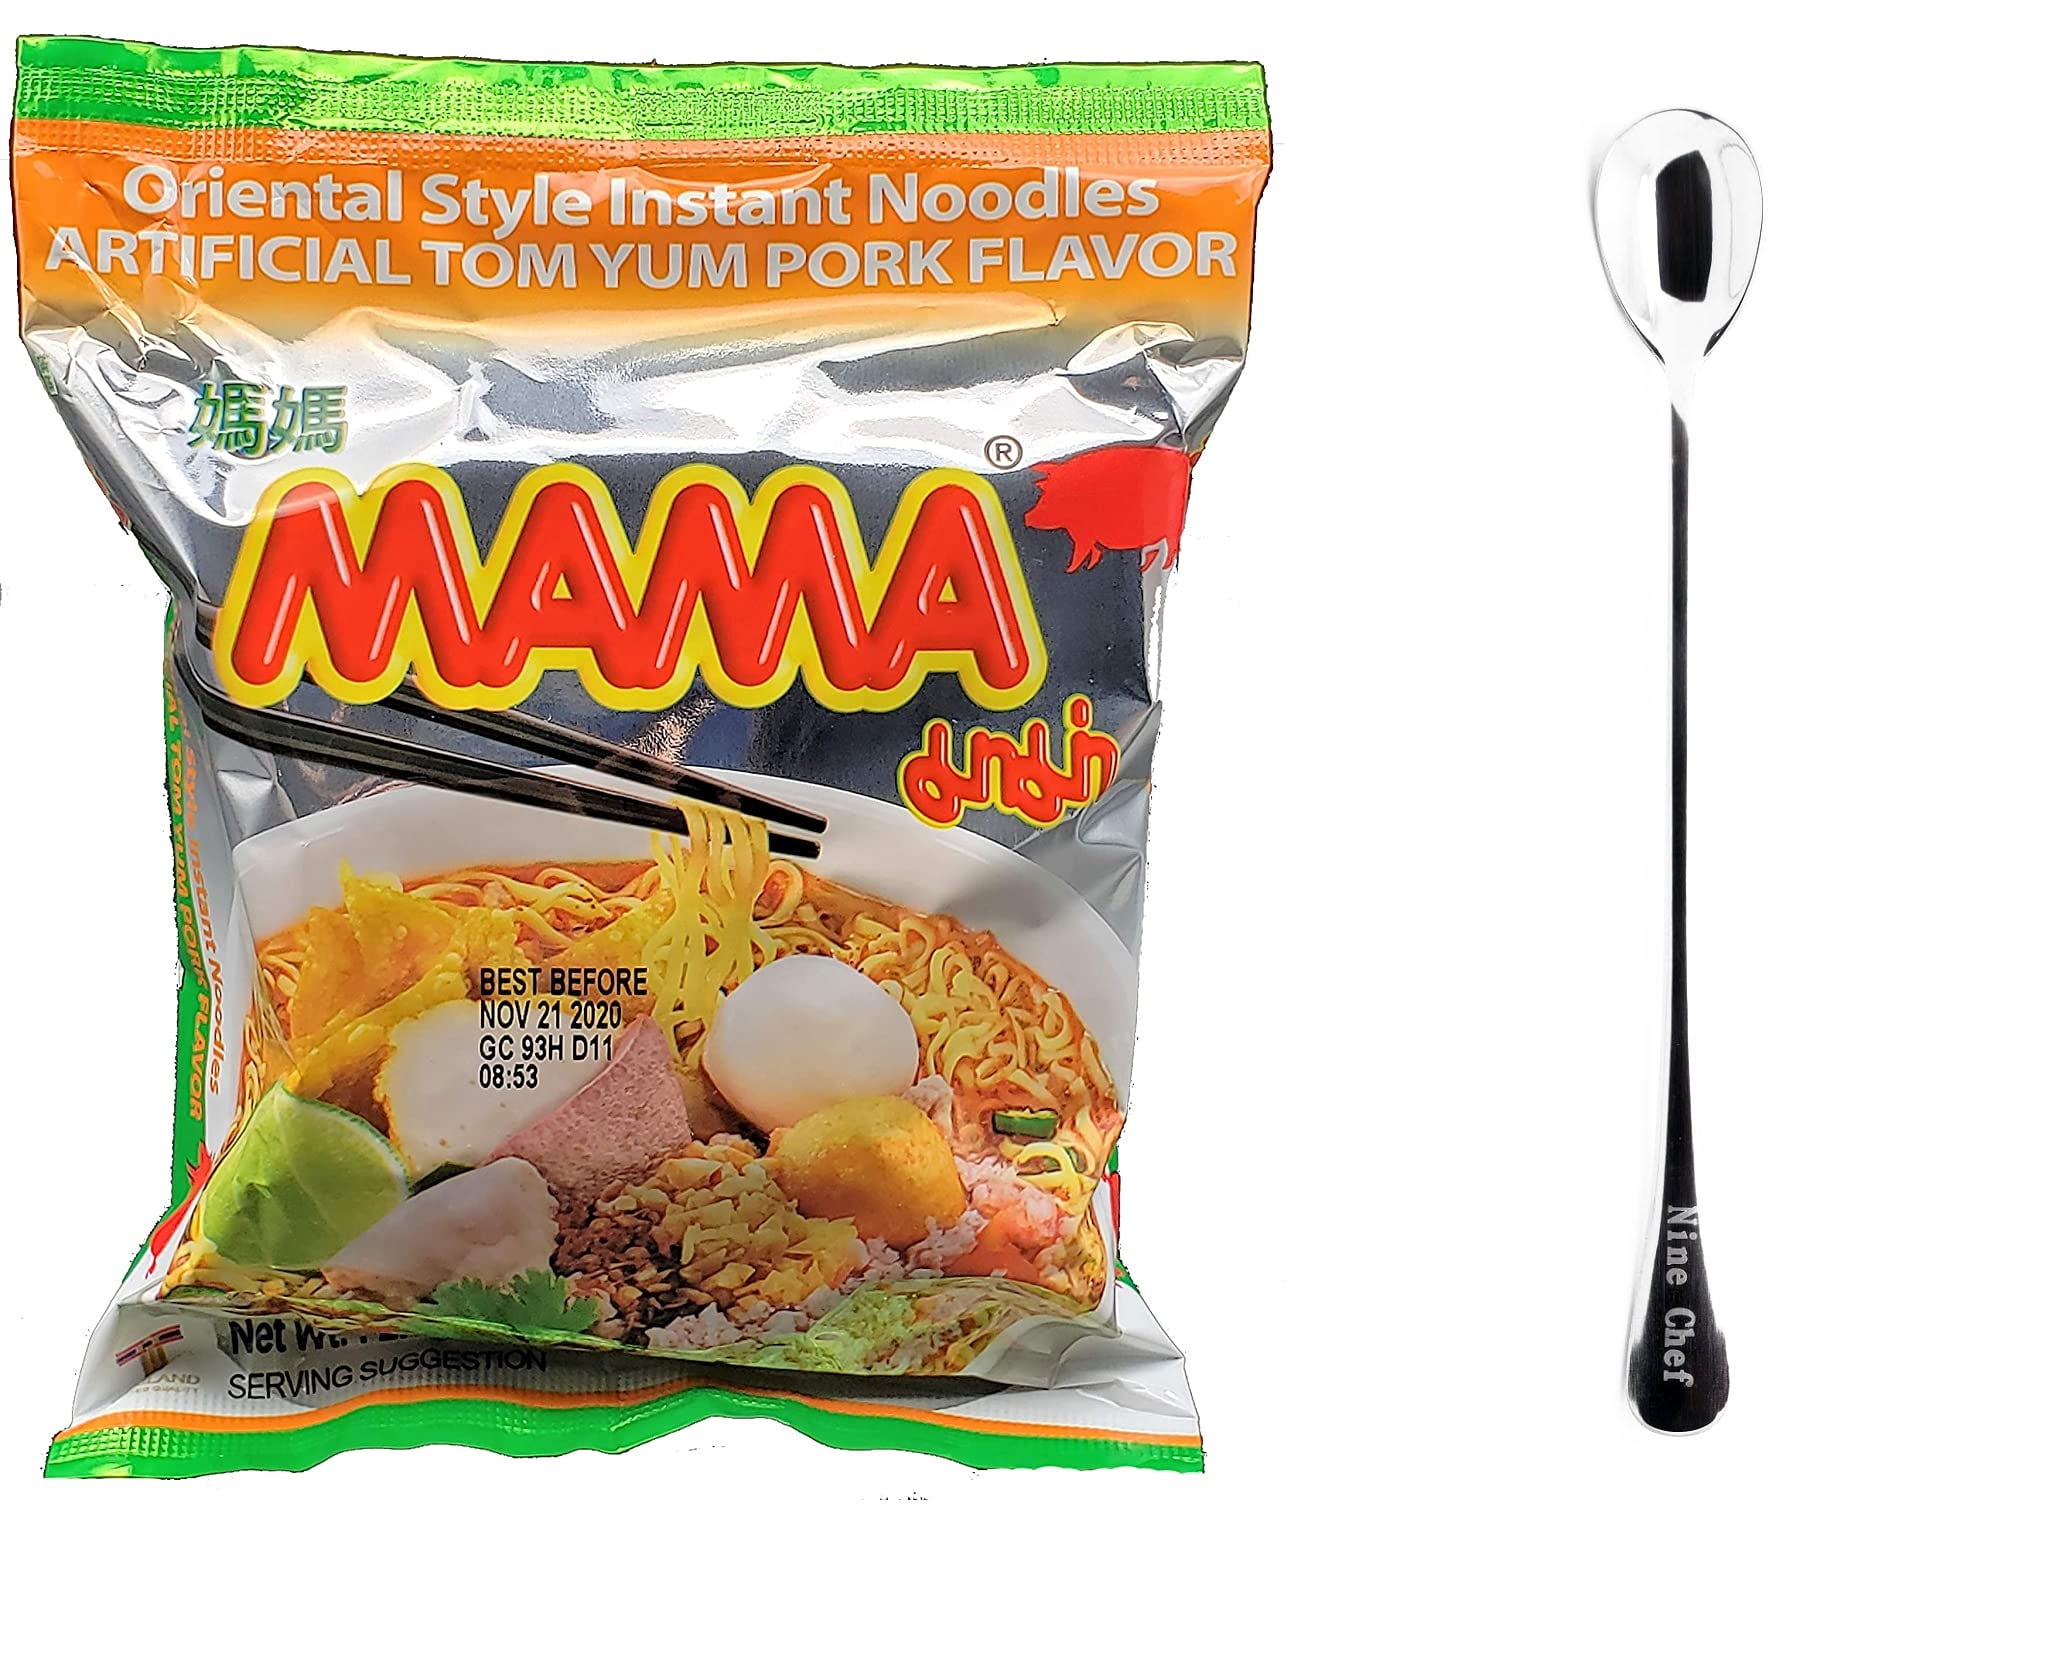 MAMA Oriental Style Instant Noodles (Shrimp Flavor Tom Yum) (Pack of 10)  plus NineChef Brand Golden Heart Spoon